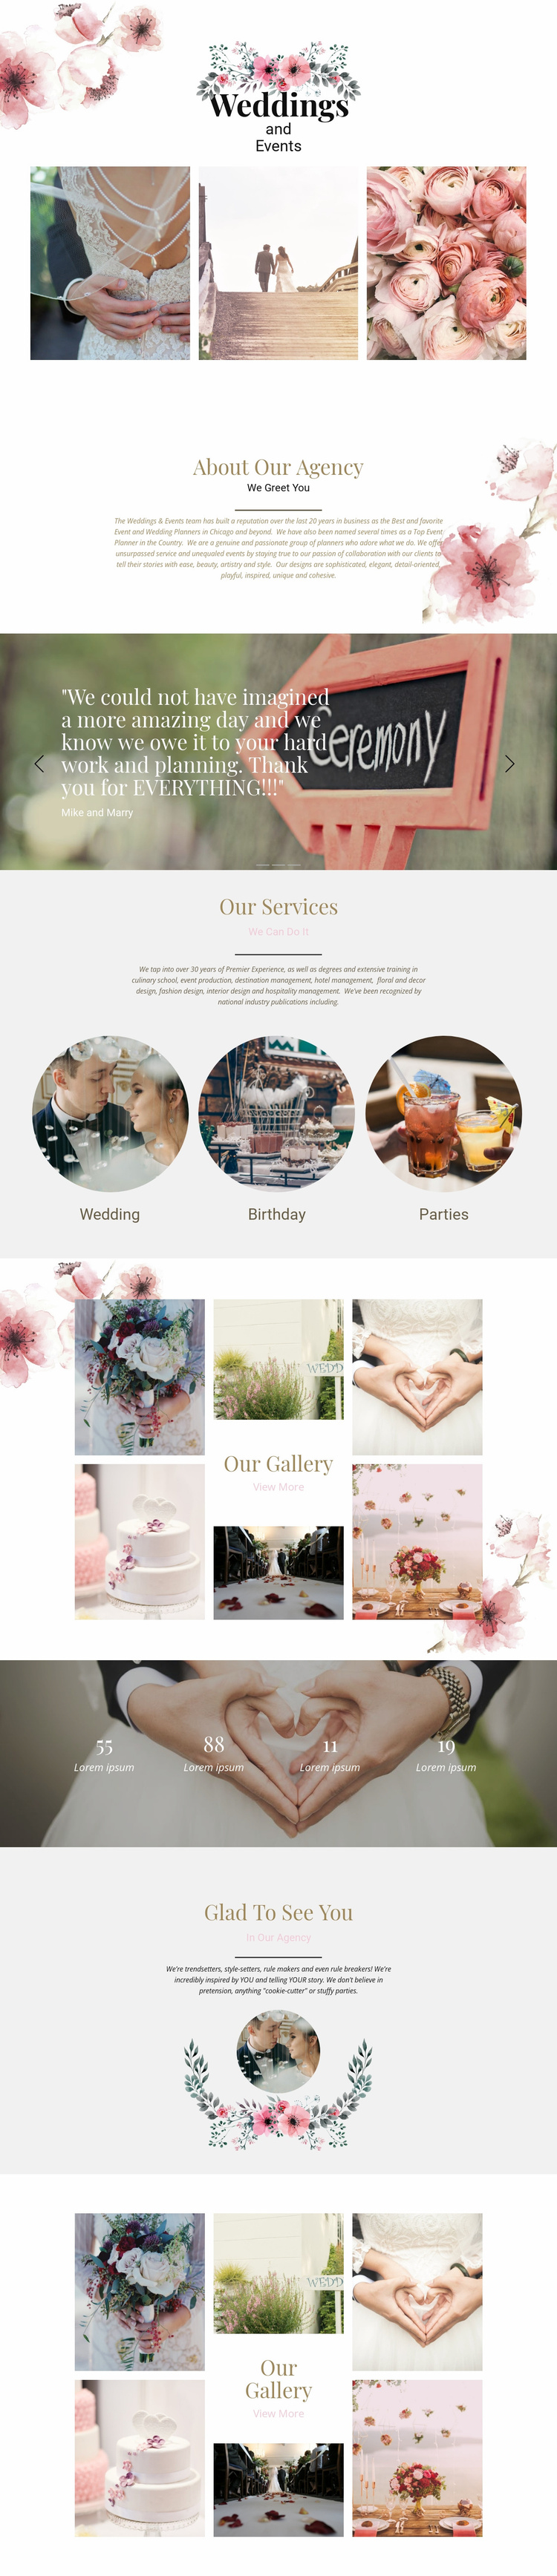 Moments of wedding Website Template